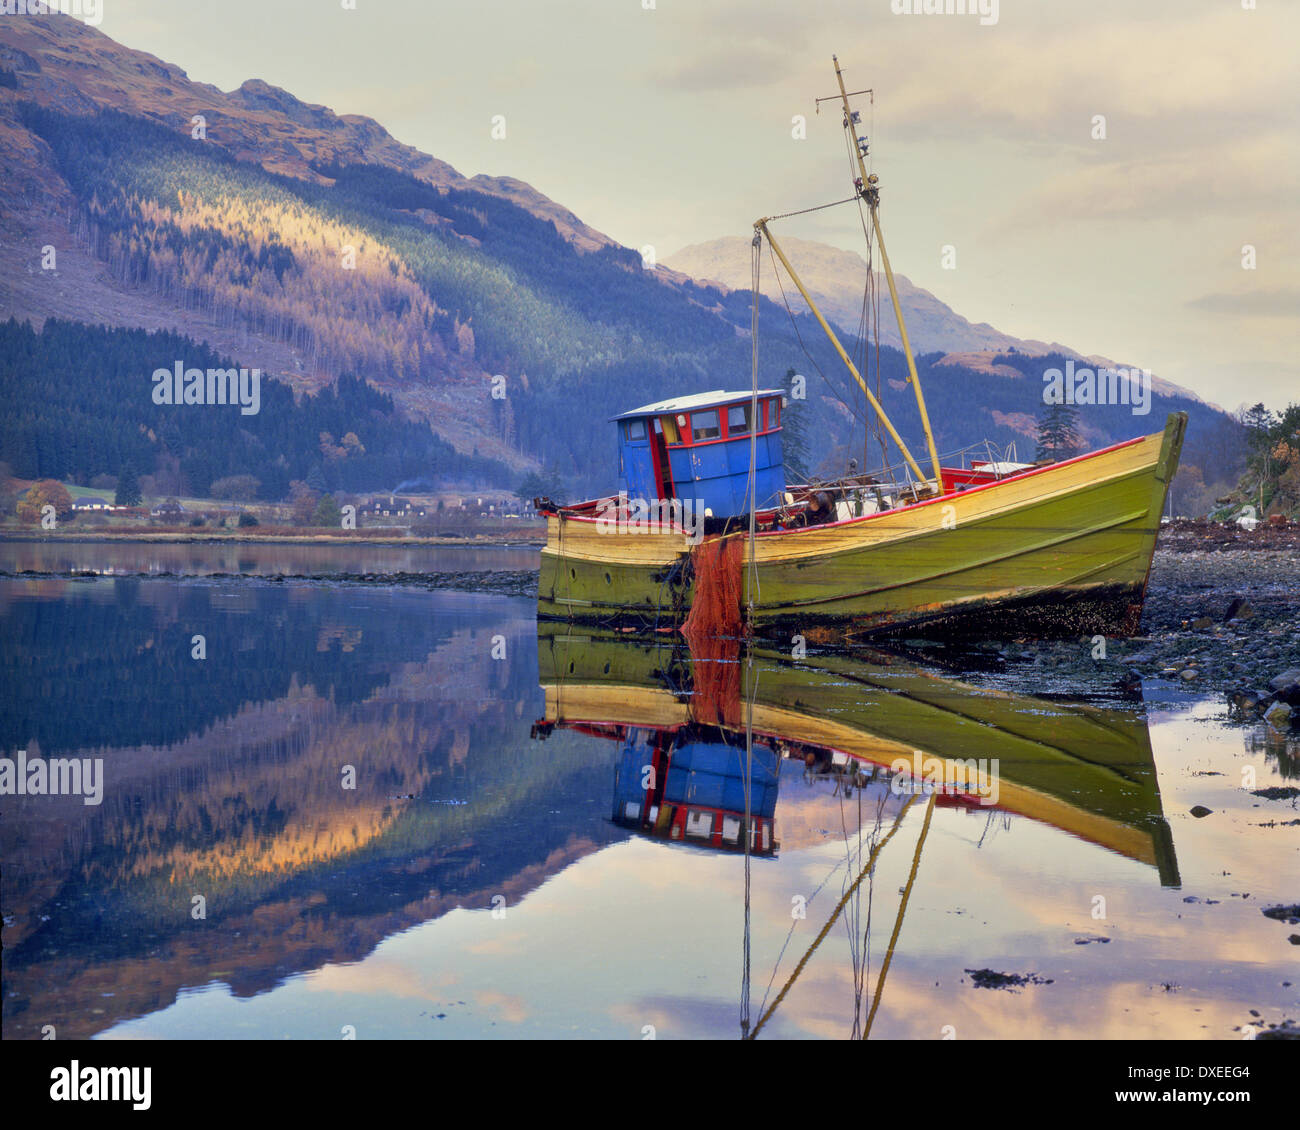 Fishing boat aground on the shore of Loch Long, arrochar. Stock Photo